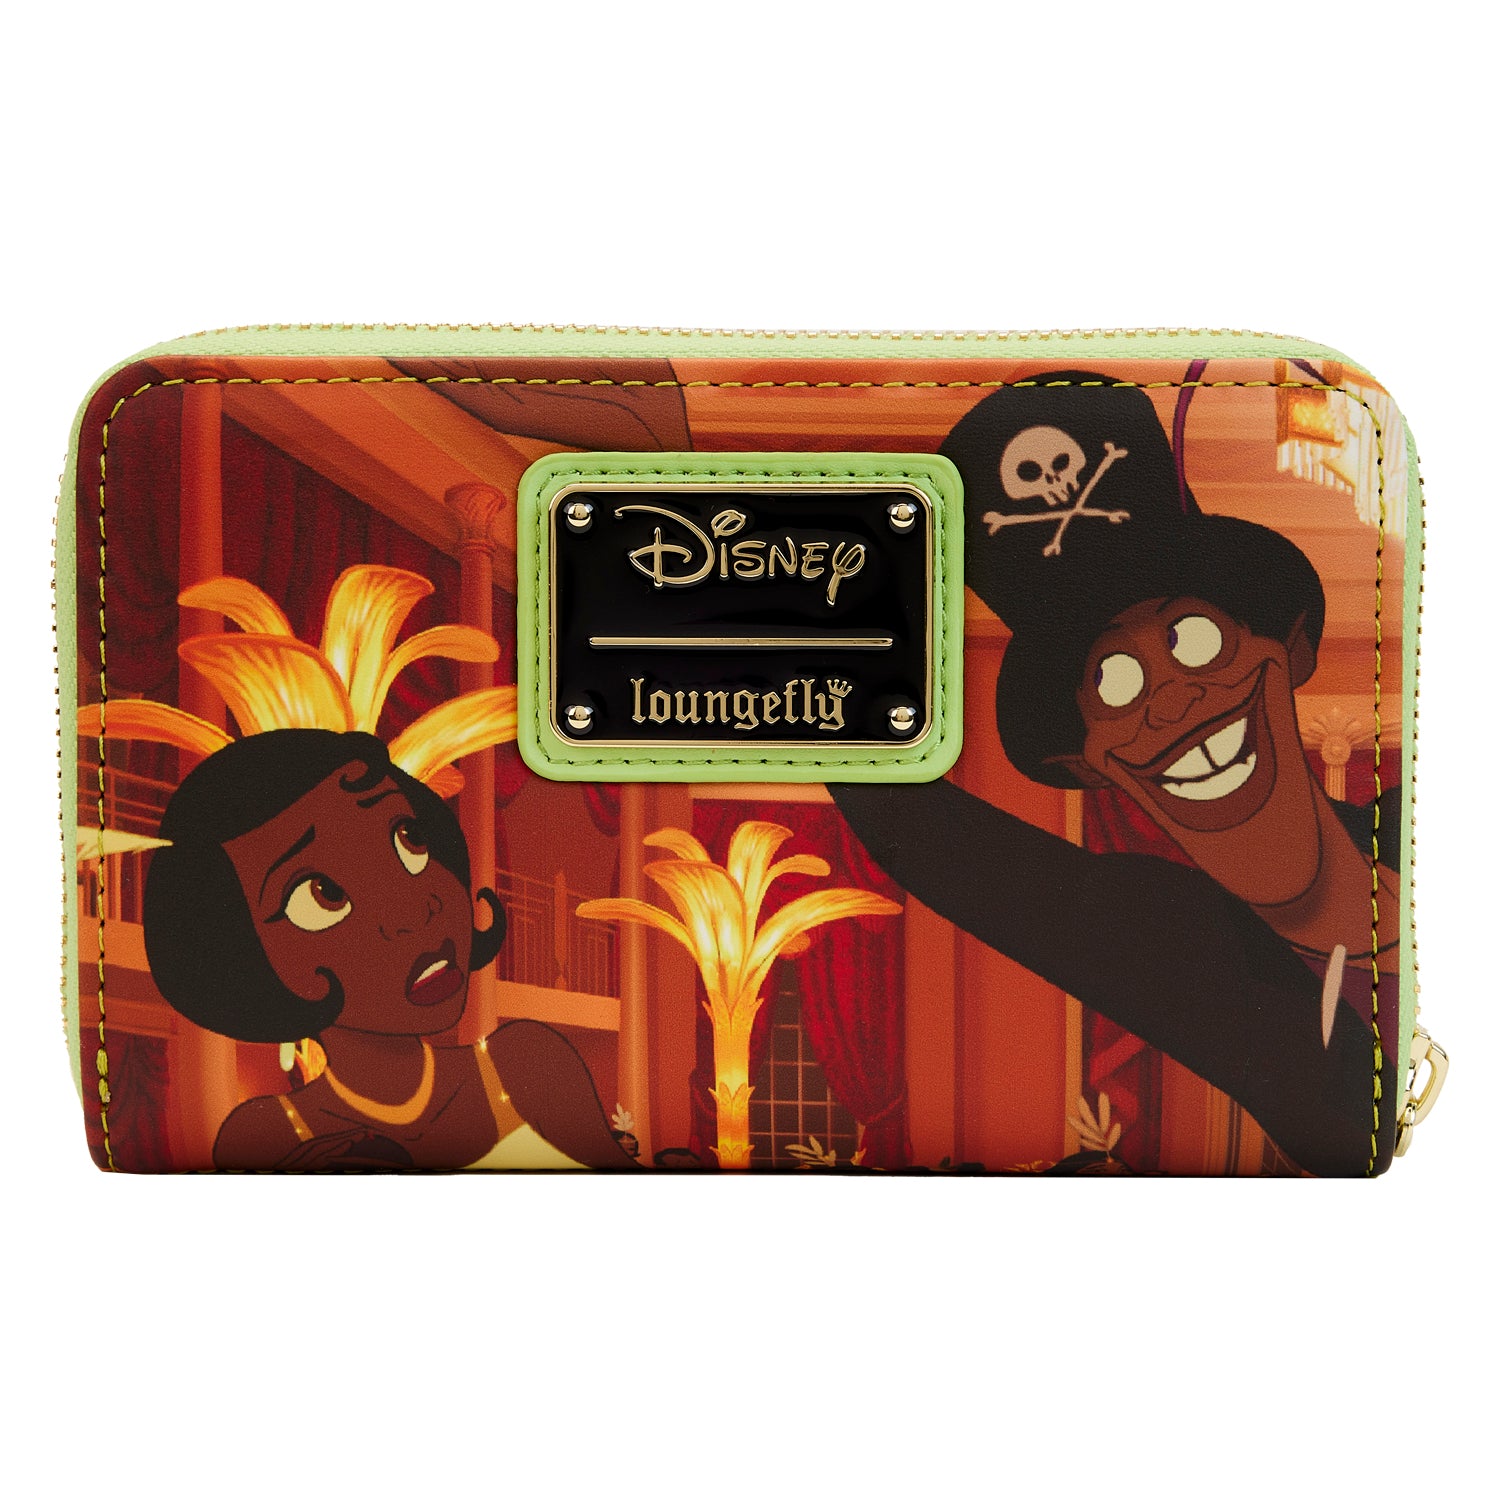 Loungefly Disney Princess and the Frog Tiana's Place Ziparound